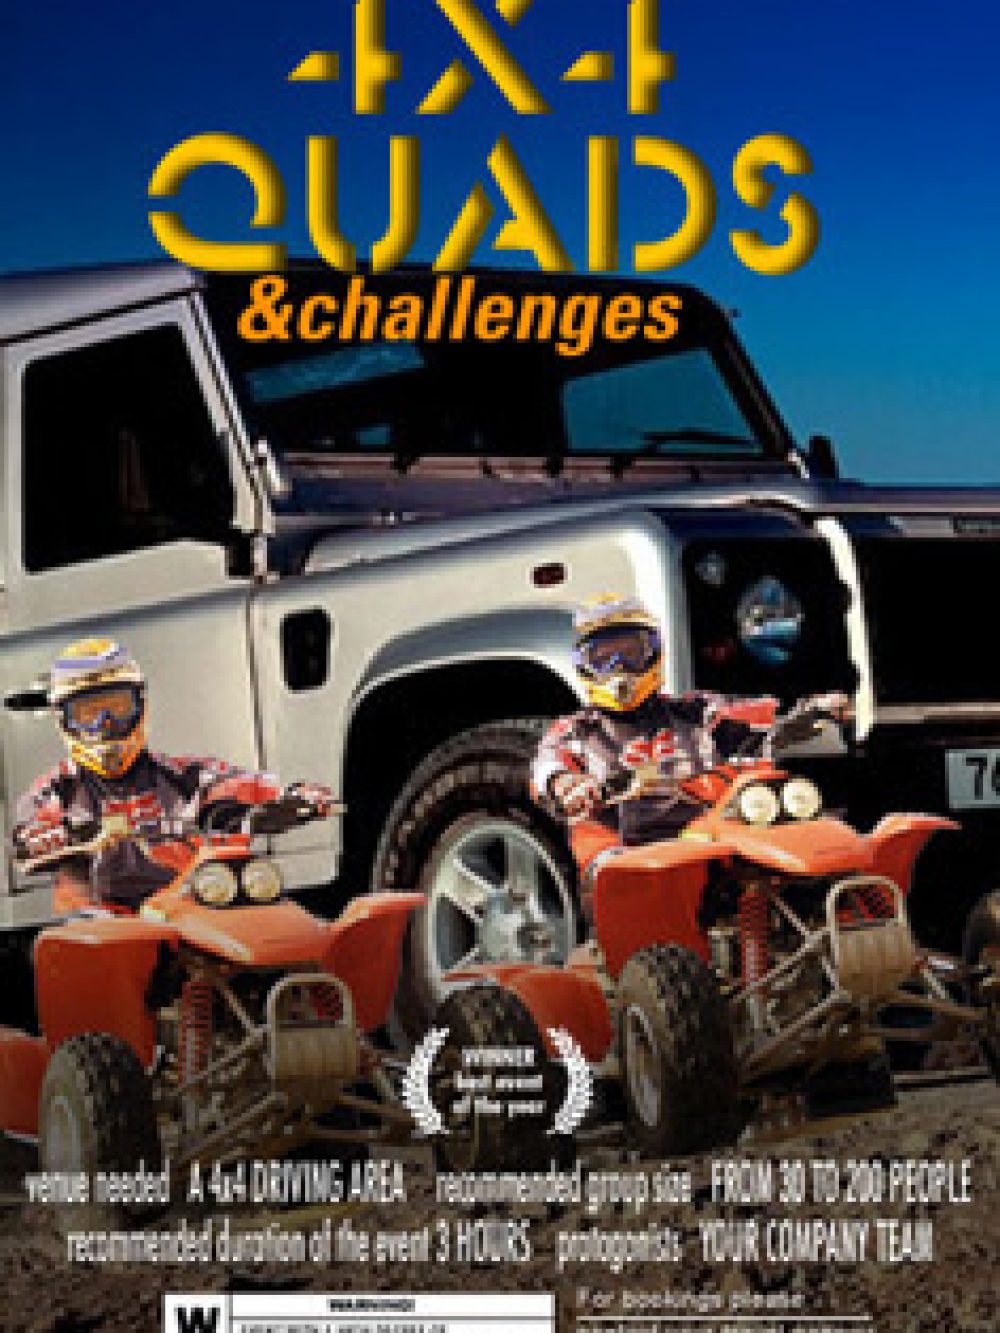 4x4_quads_and_challenges_vertical_web